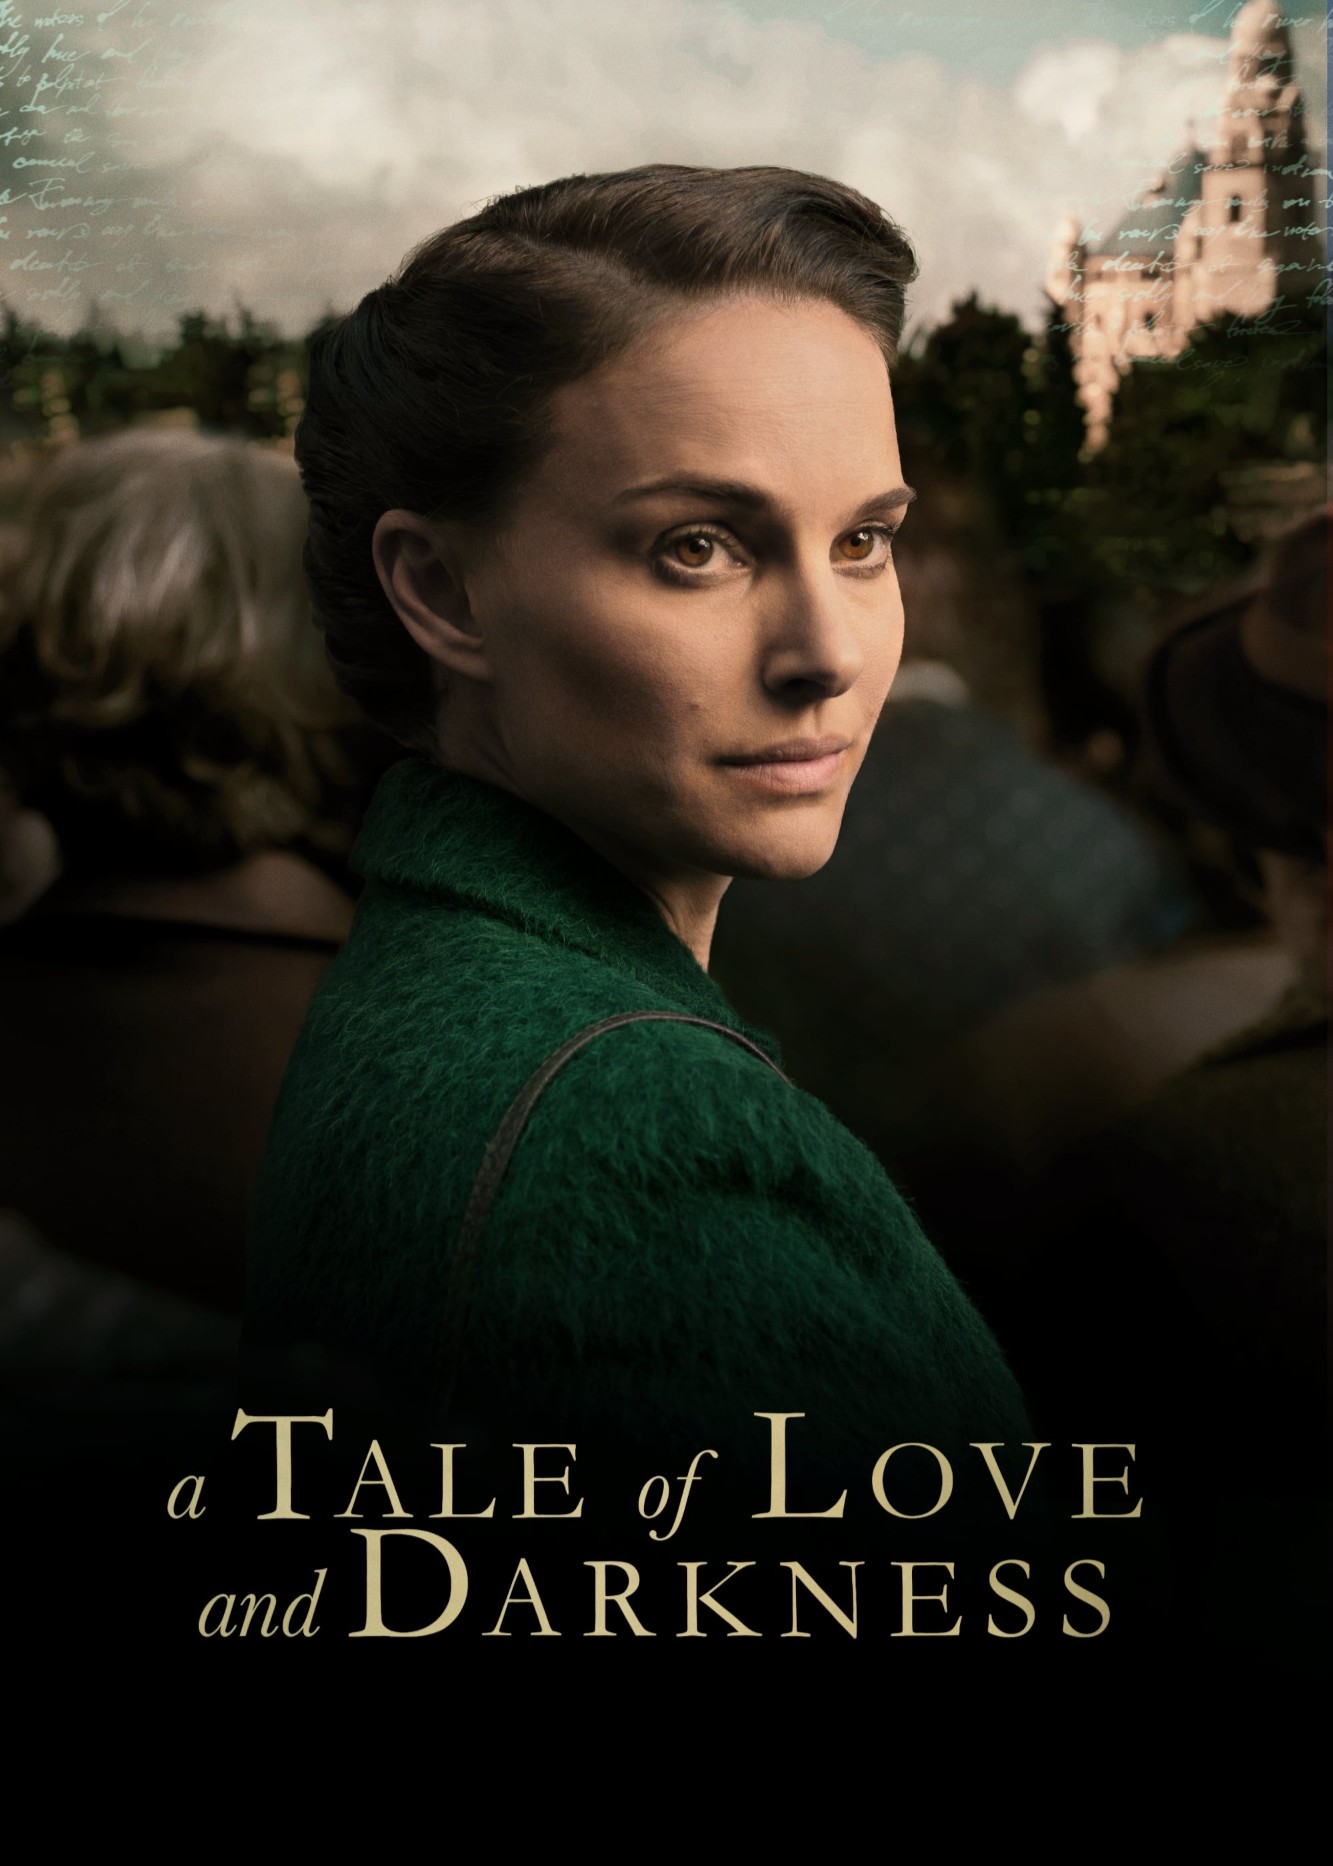 A Tale of Love and Darkness | A Tale of Love and Darkness (2015)